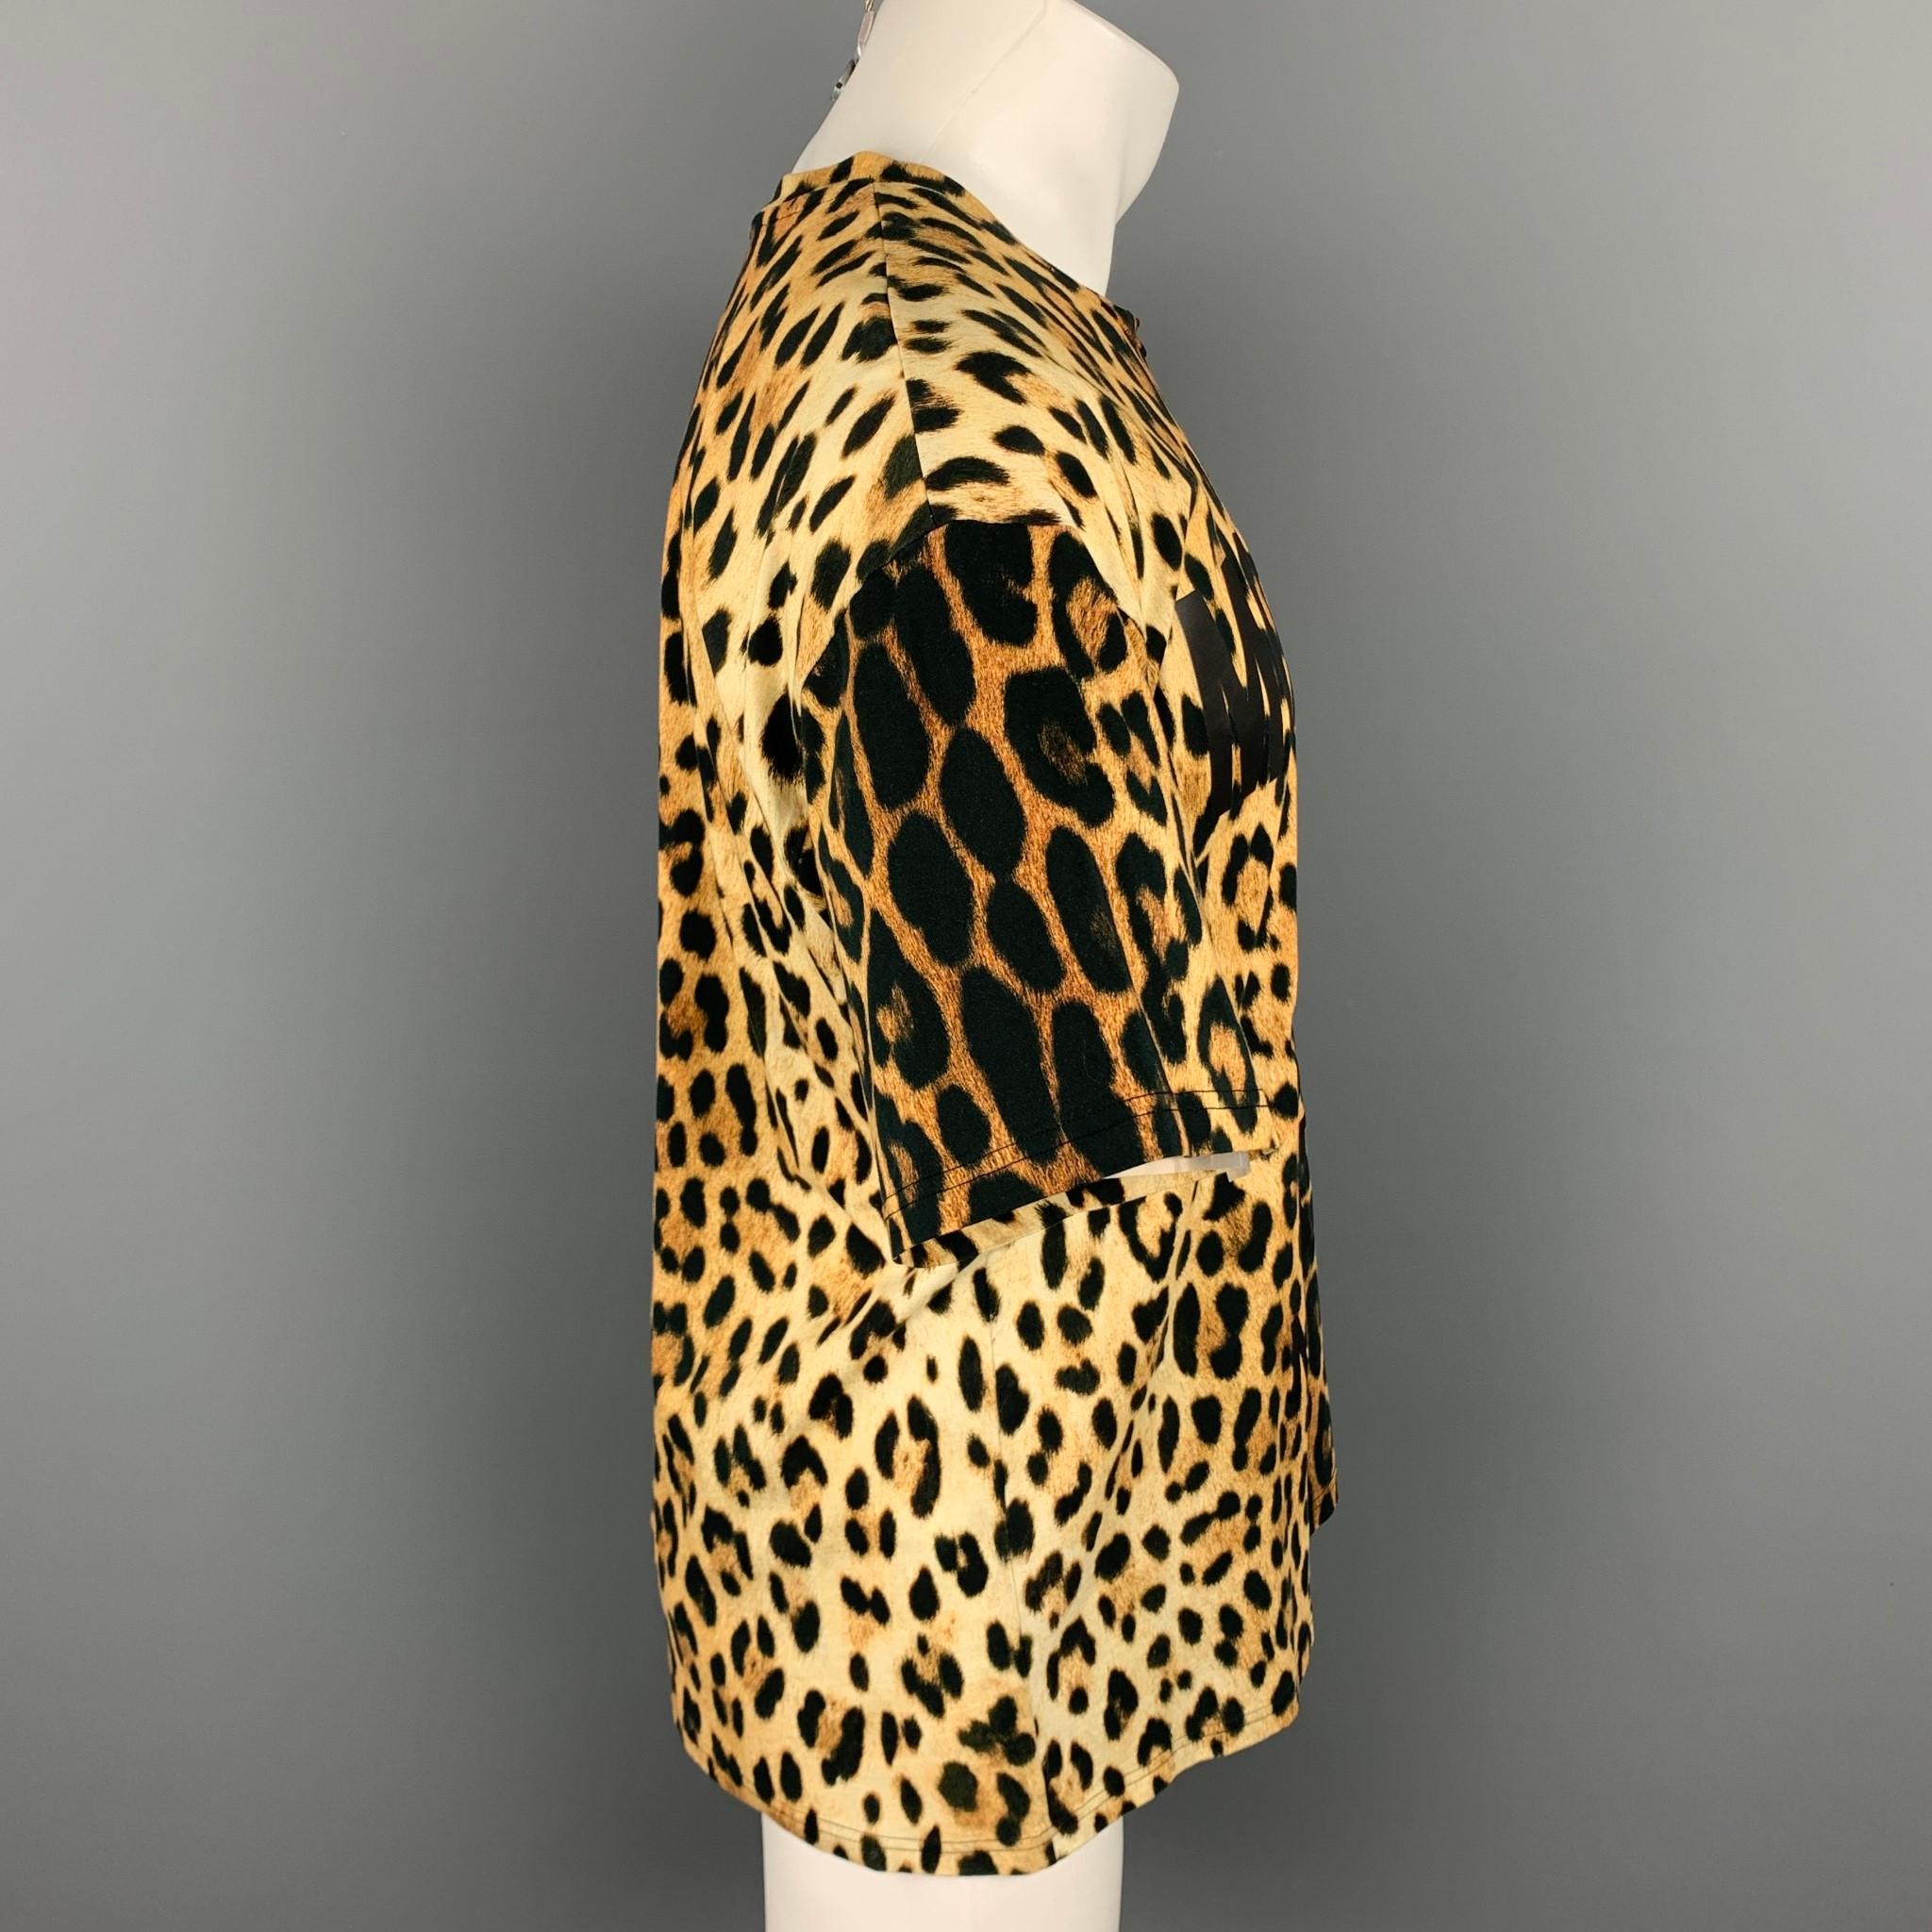 MOSCHINO COUTURE t-shirt comes in a tan & black leopard print featuring a front logo design and a crew-neck. Made in Portugal. 

Very Good Pre-Owned Condition.
Marked: L

Measurements:

Shoulder: 22 in.
Chest: 42 in.
Sleeve: 8.5 in.
Length: 27 in. 